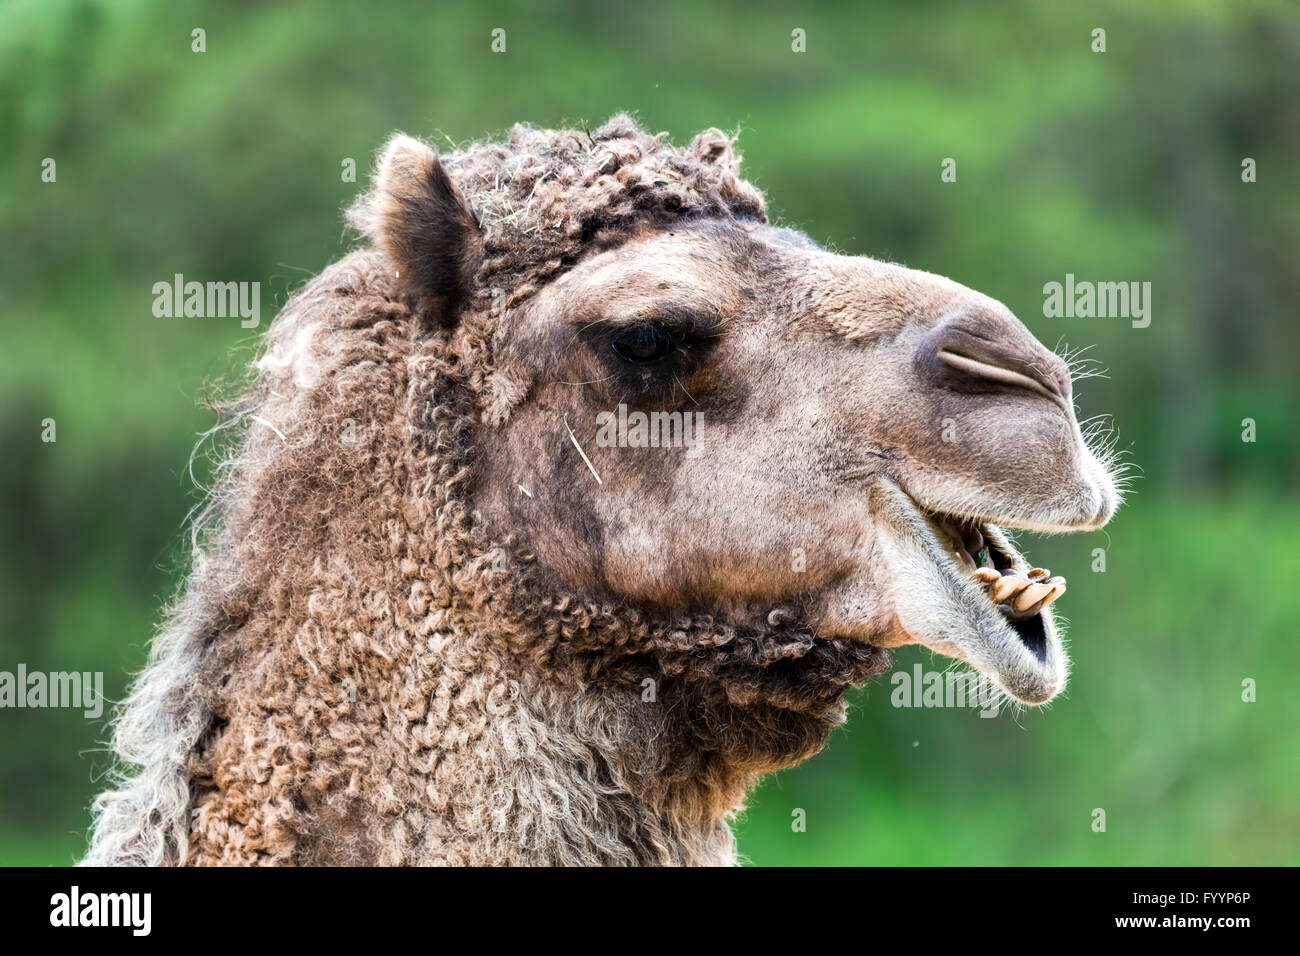 Bactrian camel portrait. Funny expression Stock Photo